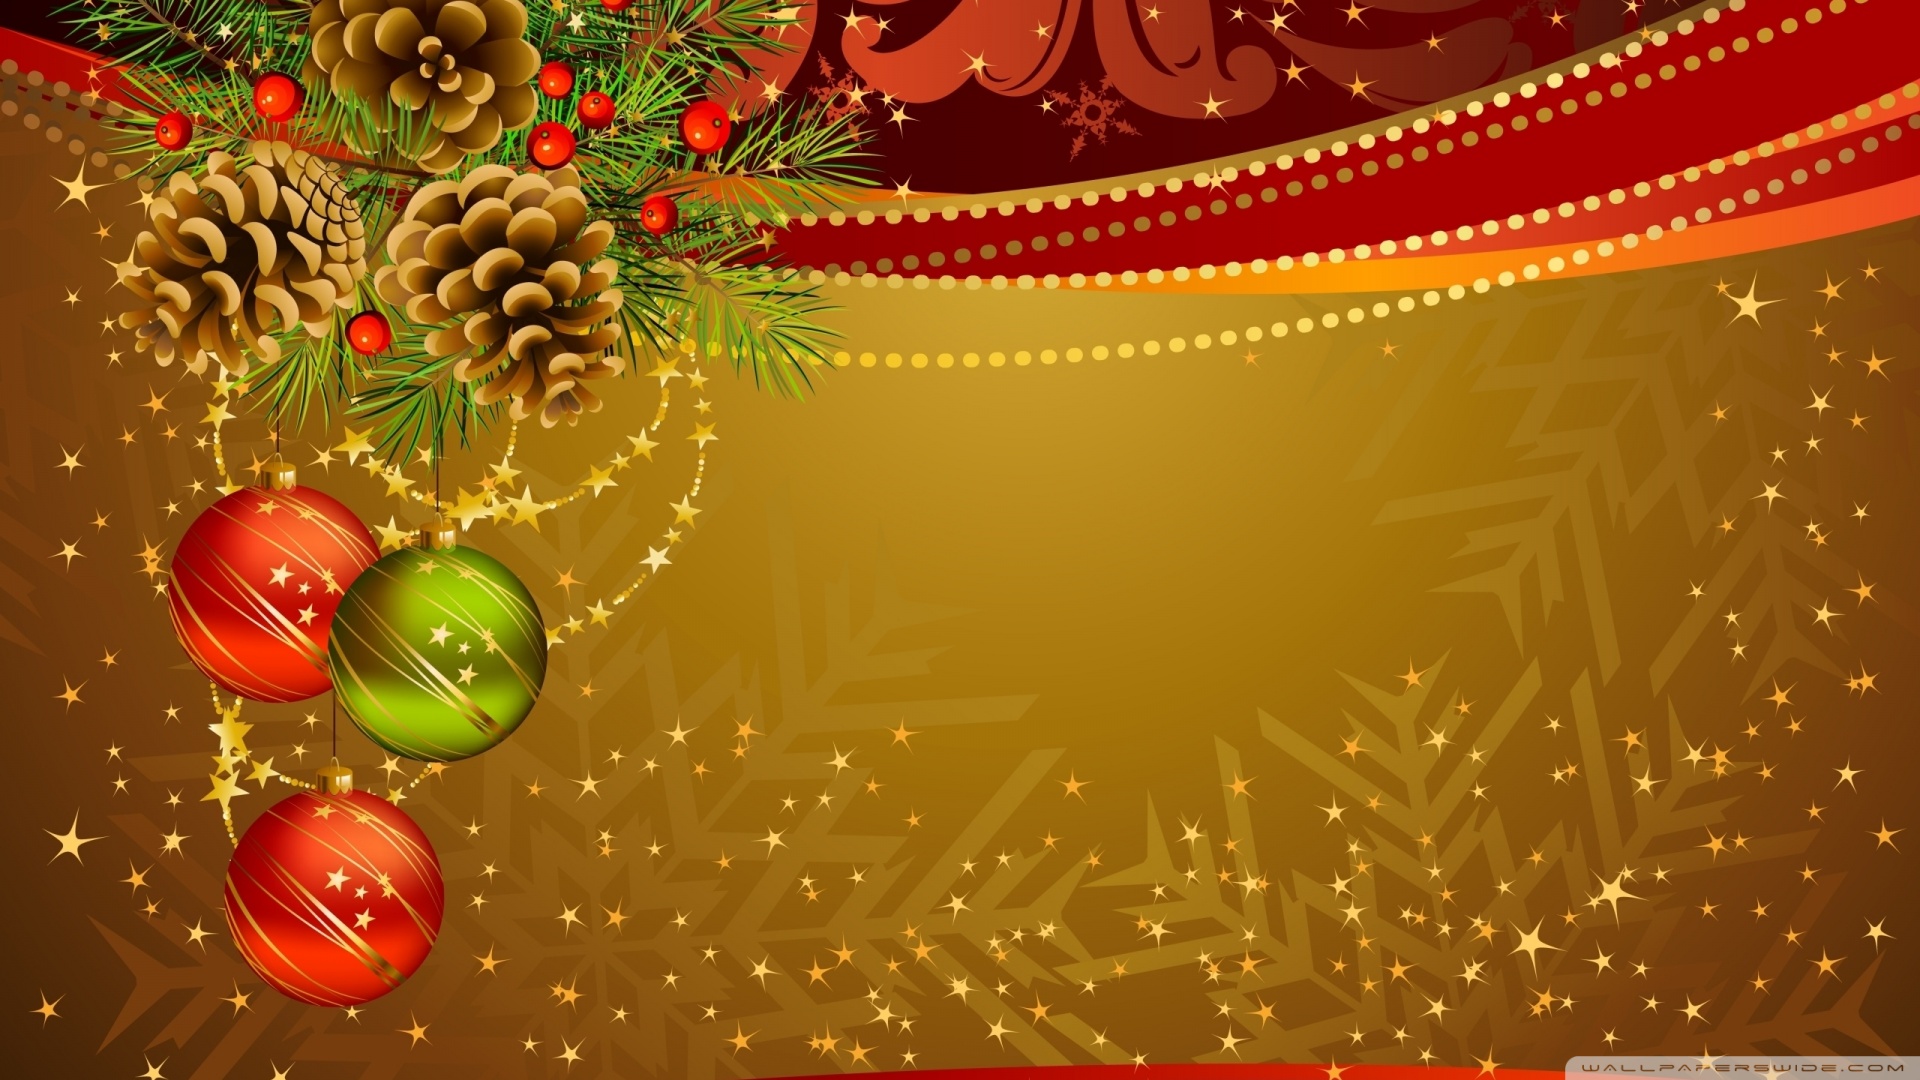 New Year Greeting Wallpaper New Year Greeting Wallpaper5 - New Year Greetings Background - HD Wallpaper 